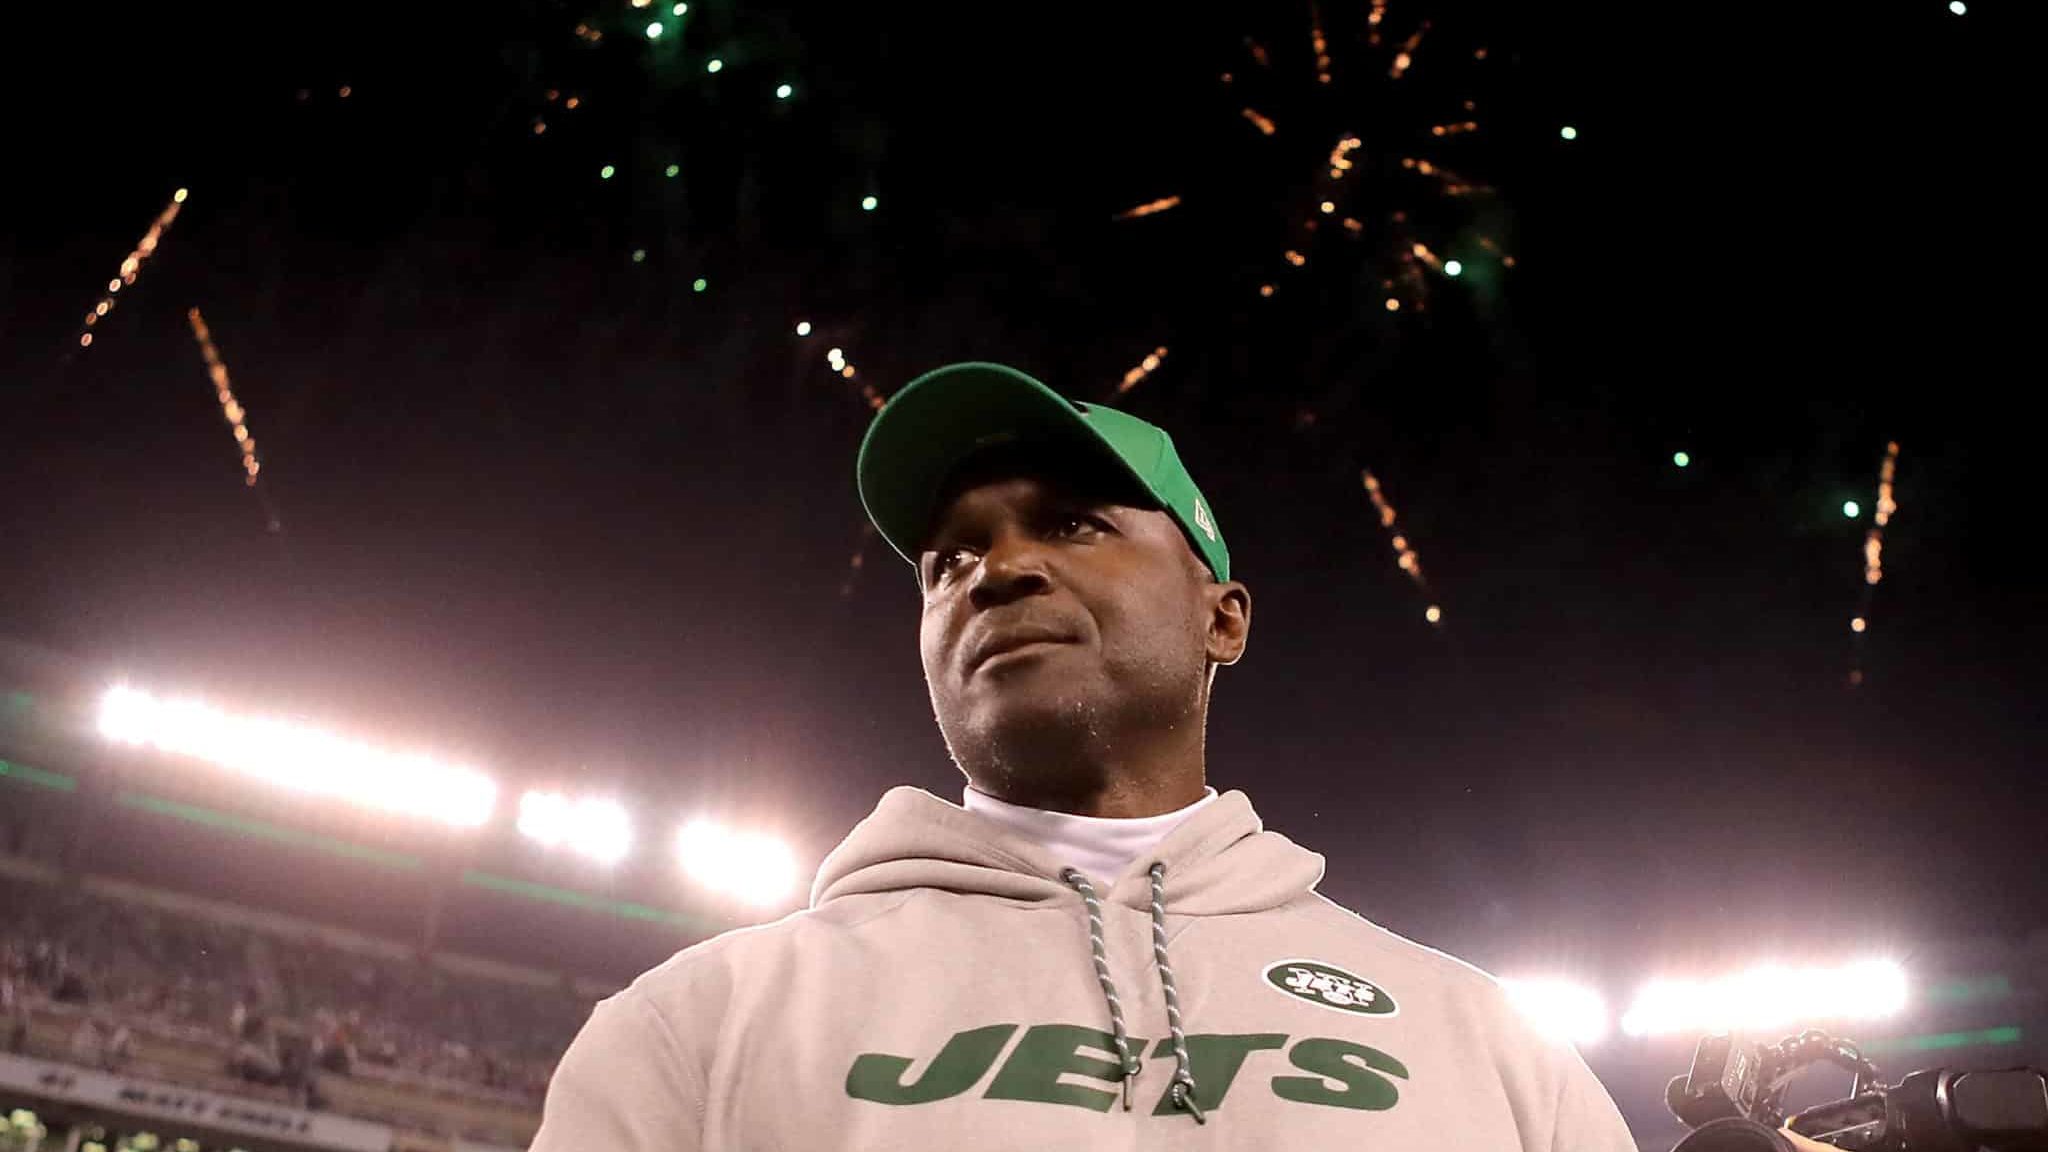 EAST RUTHERFORD, NJ - NOVEMBER 02: Head coach Todd Bowles of the New York Jets leaves the field following the Jets' 34-21 win against the Buffalo Bills during their game at MetLife Stadium on November 2, 2017 in East Rutherford, New Jersey.